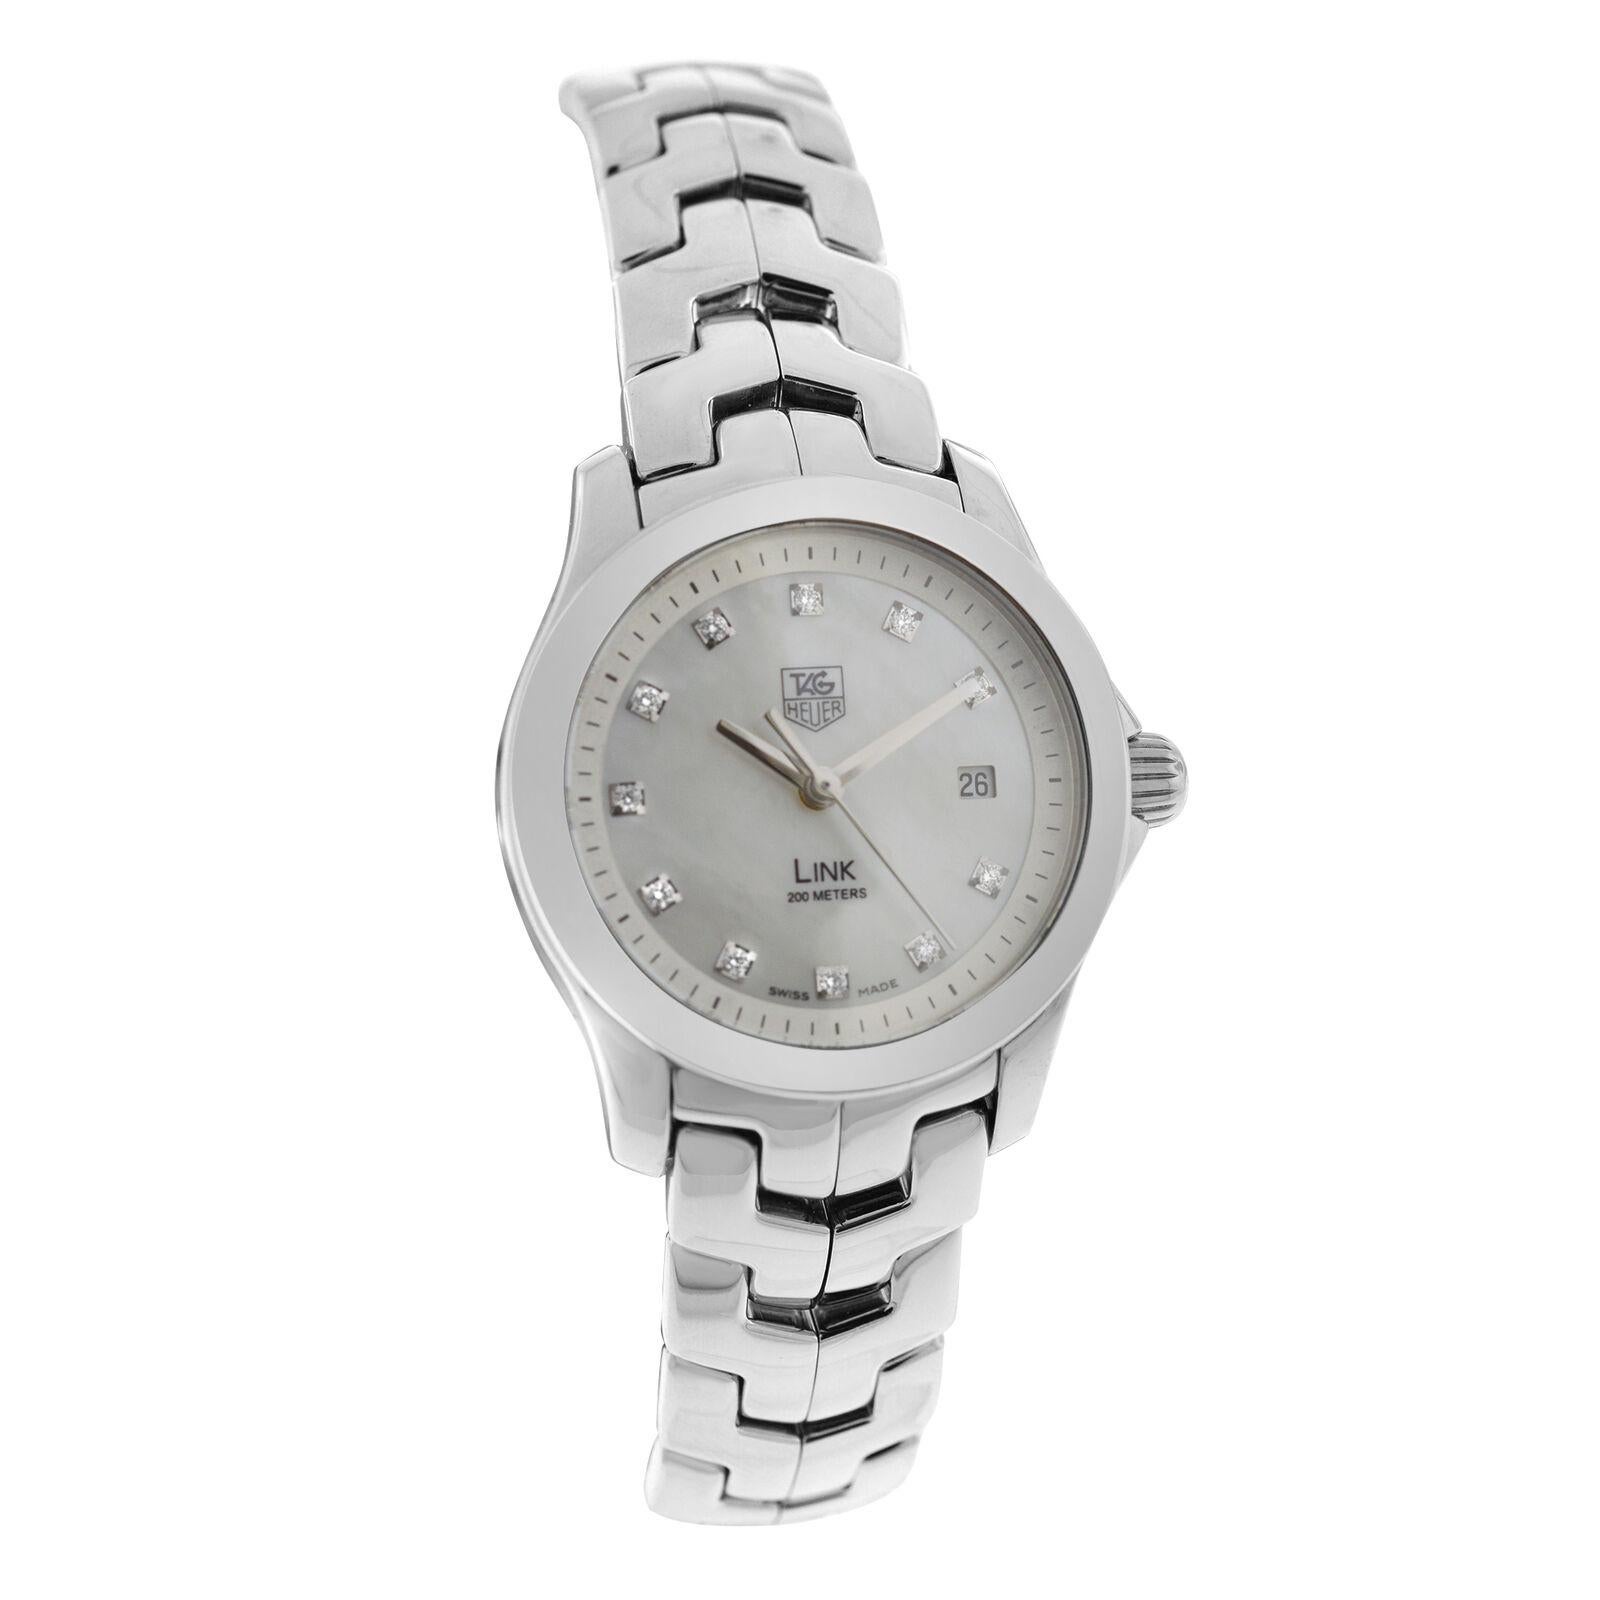 Brand	Tag Heuer
Model	Link WJF1317
Gender	Ladies
Condition	Pre-owned
Movement	Swiss Quartz
Case Material	Stainless Steel
Bracelet / Strap Material	
Stainless Steel

Clasp / Buckle Material	
Stainless Steel 

Clasp Type	Deployment
Bracelet / Strap